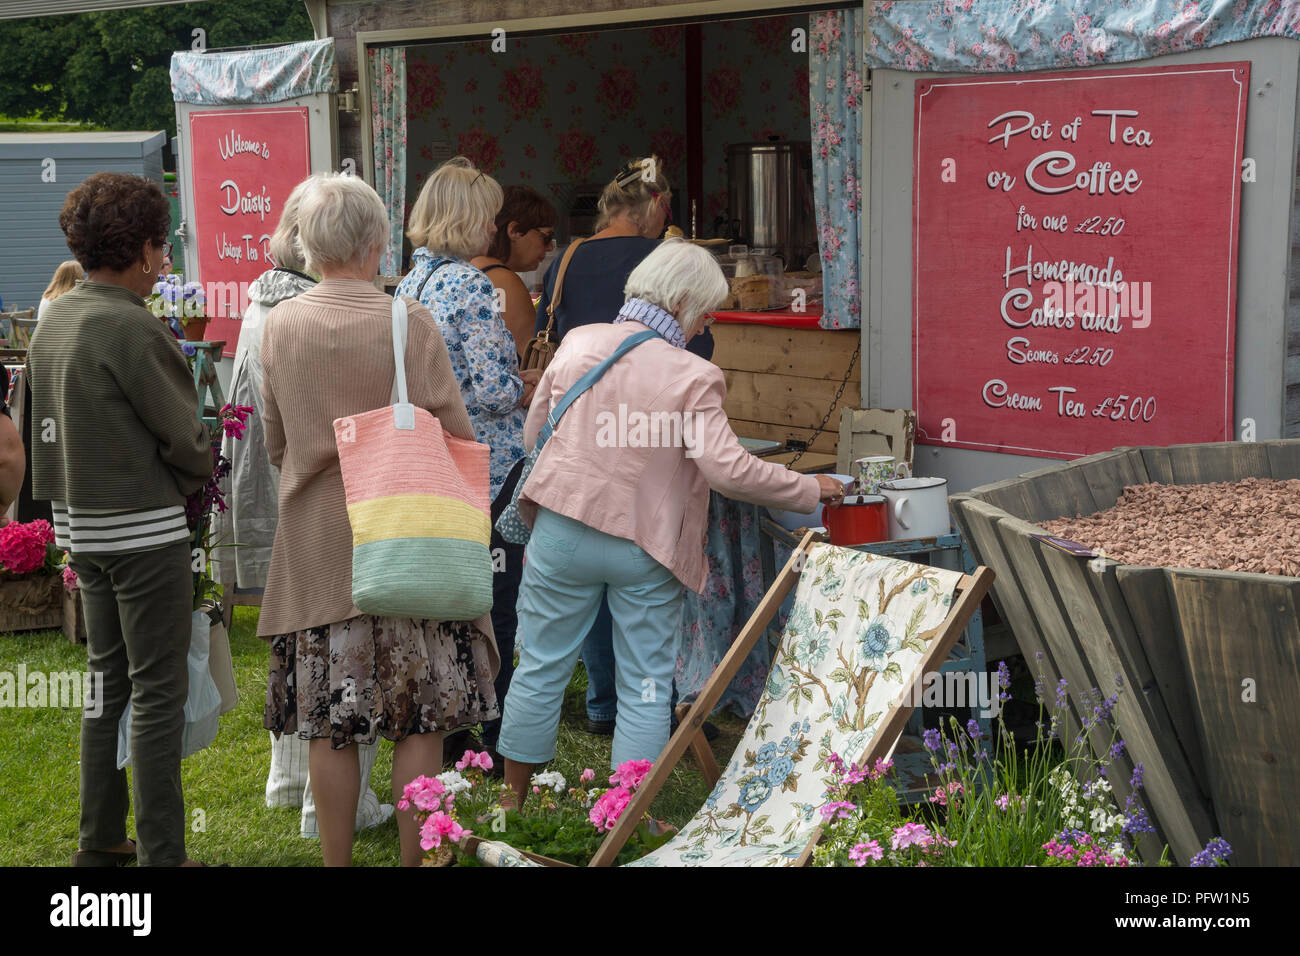 People queue outside Daisy's Vintage Tea Rooms (retro mobile catering service) for refreshments - RHS Chatsworth Flower Show, Derbyshire, England, UK. Stock Photo